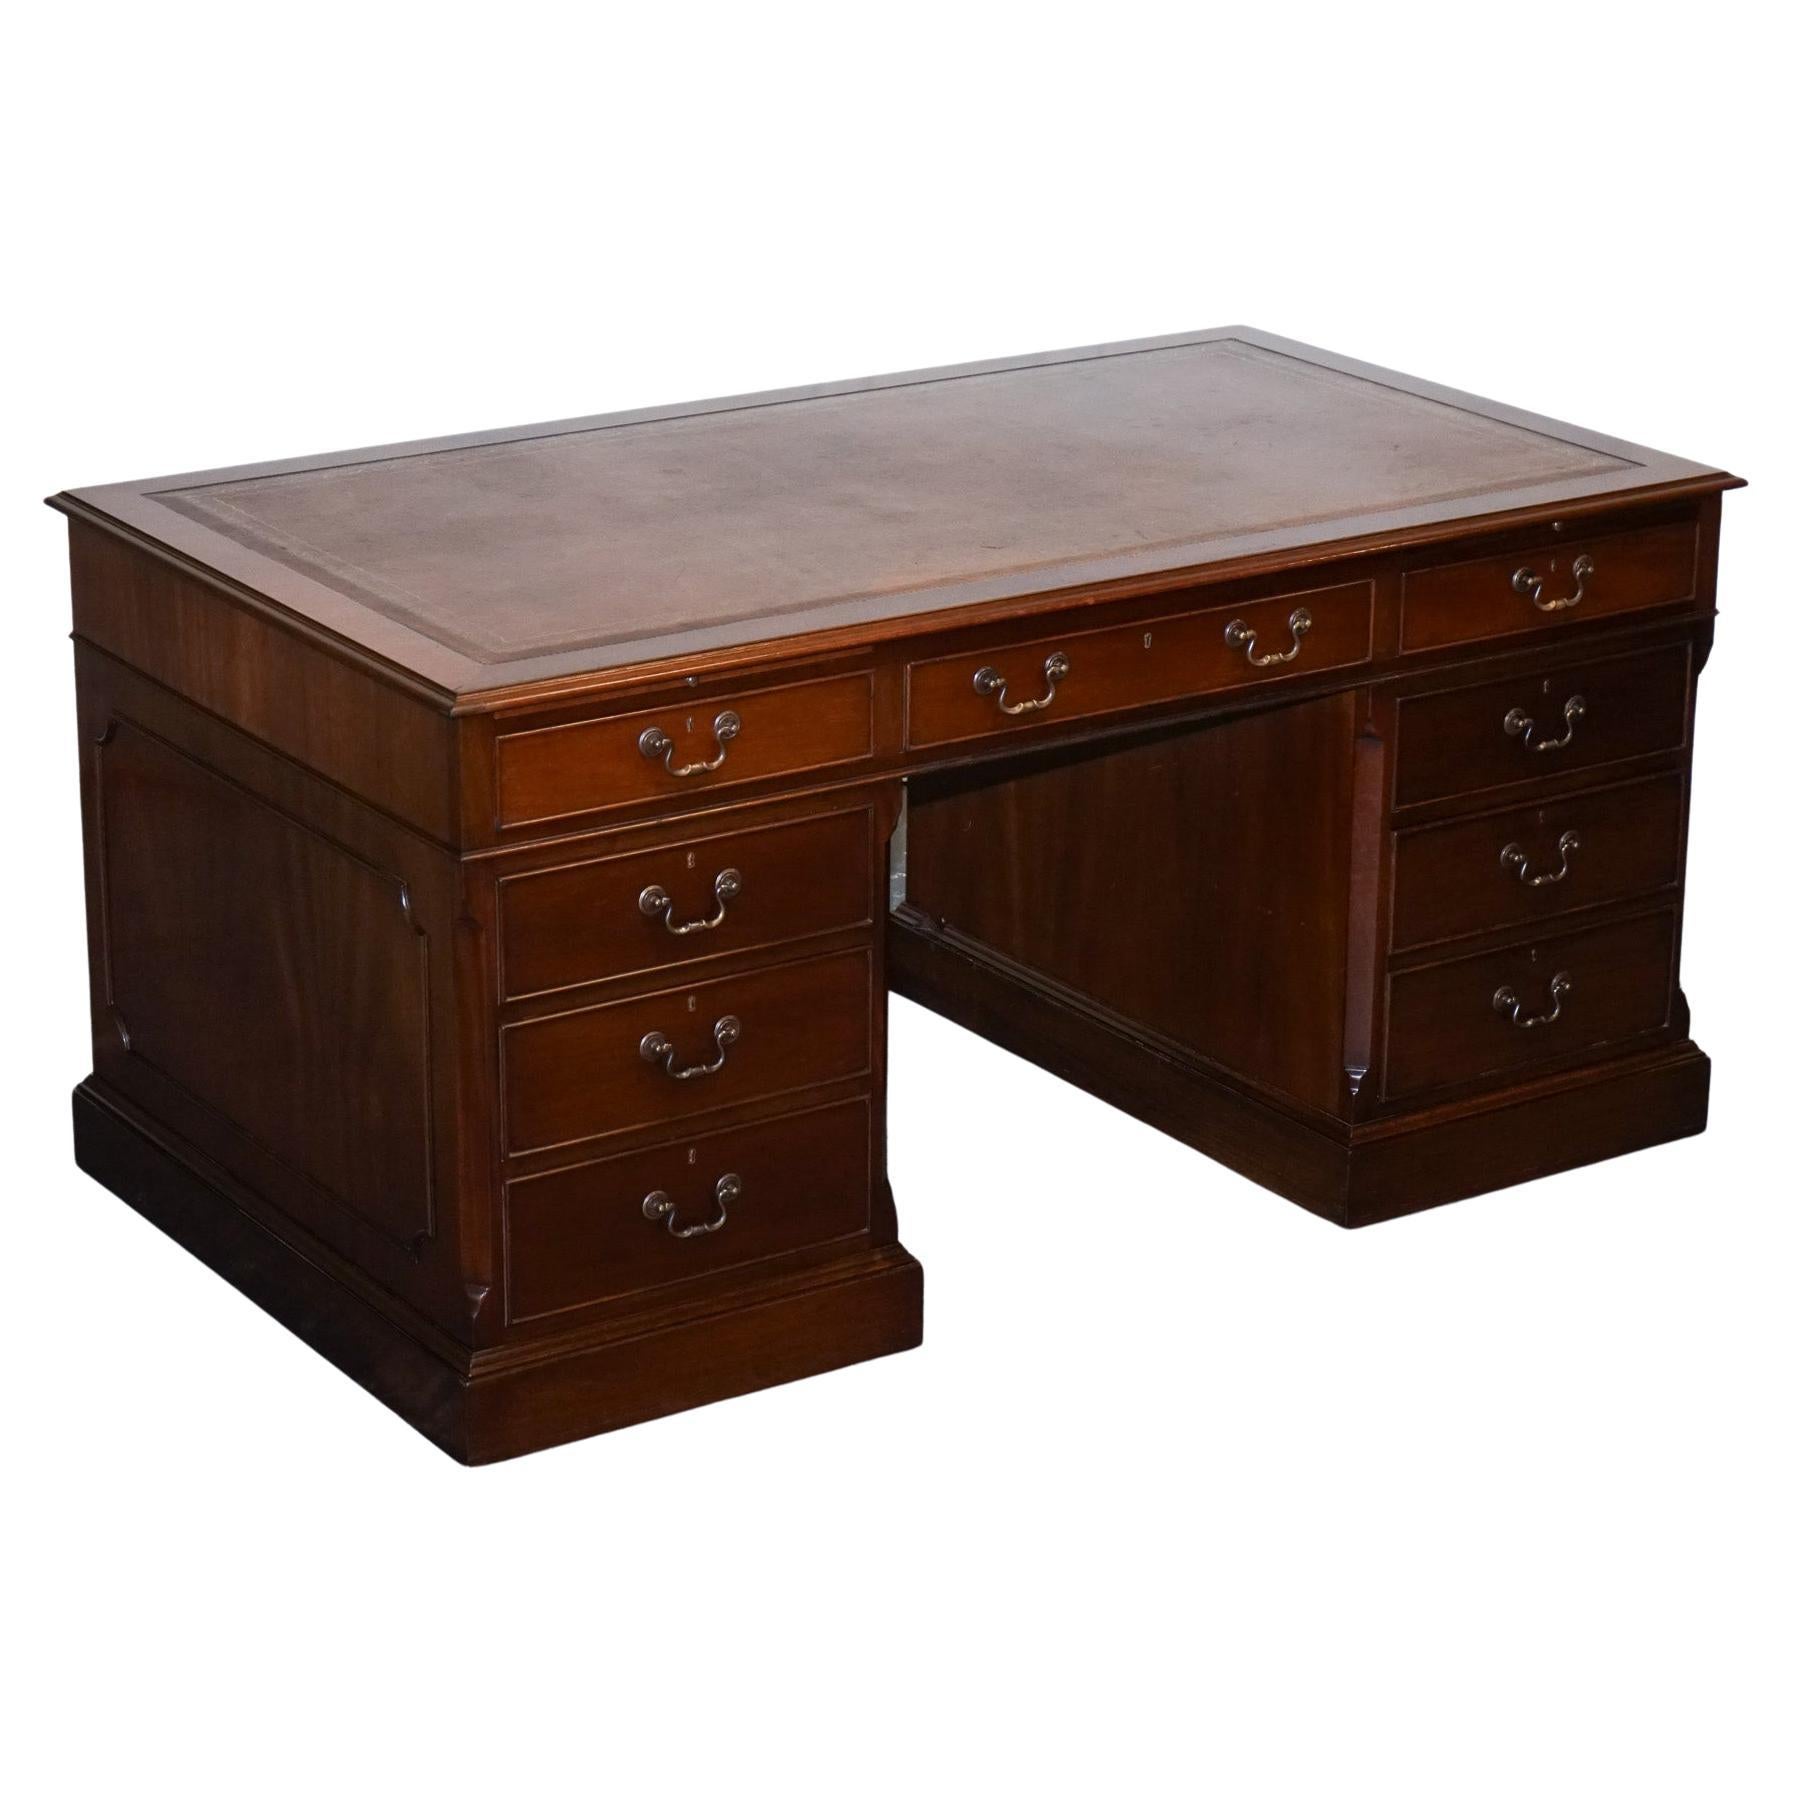 STUNNING LARGE TWiN PEDESTAL DESK BROWN LEATHER TOP SLIDING OUT TRAYS 8 DRAWERS